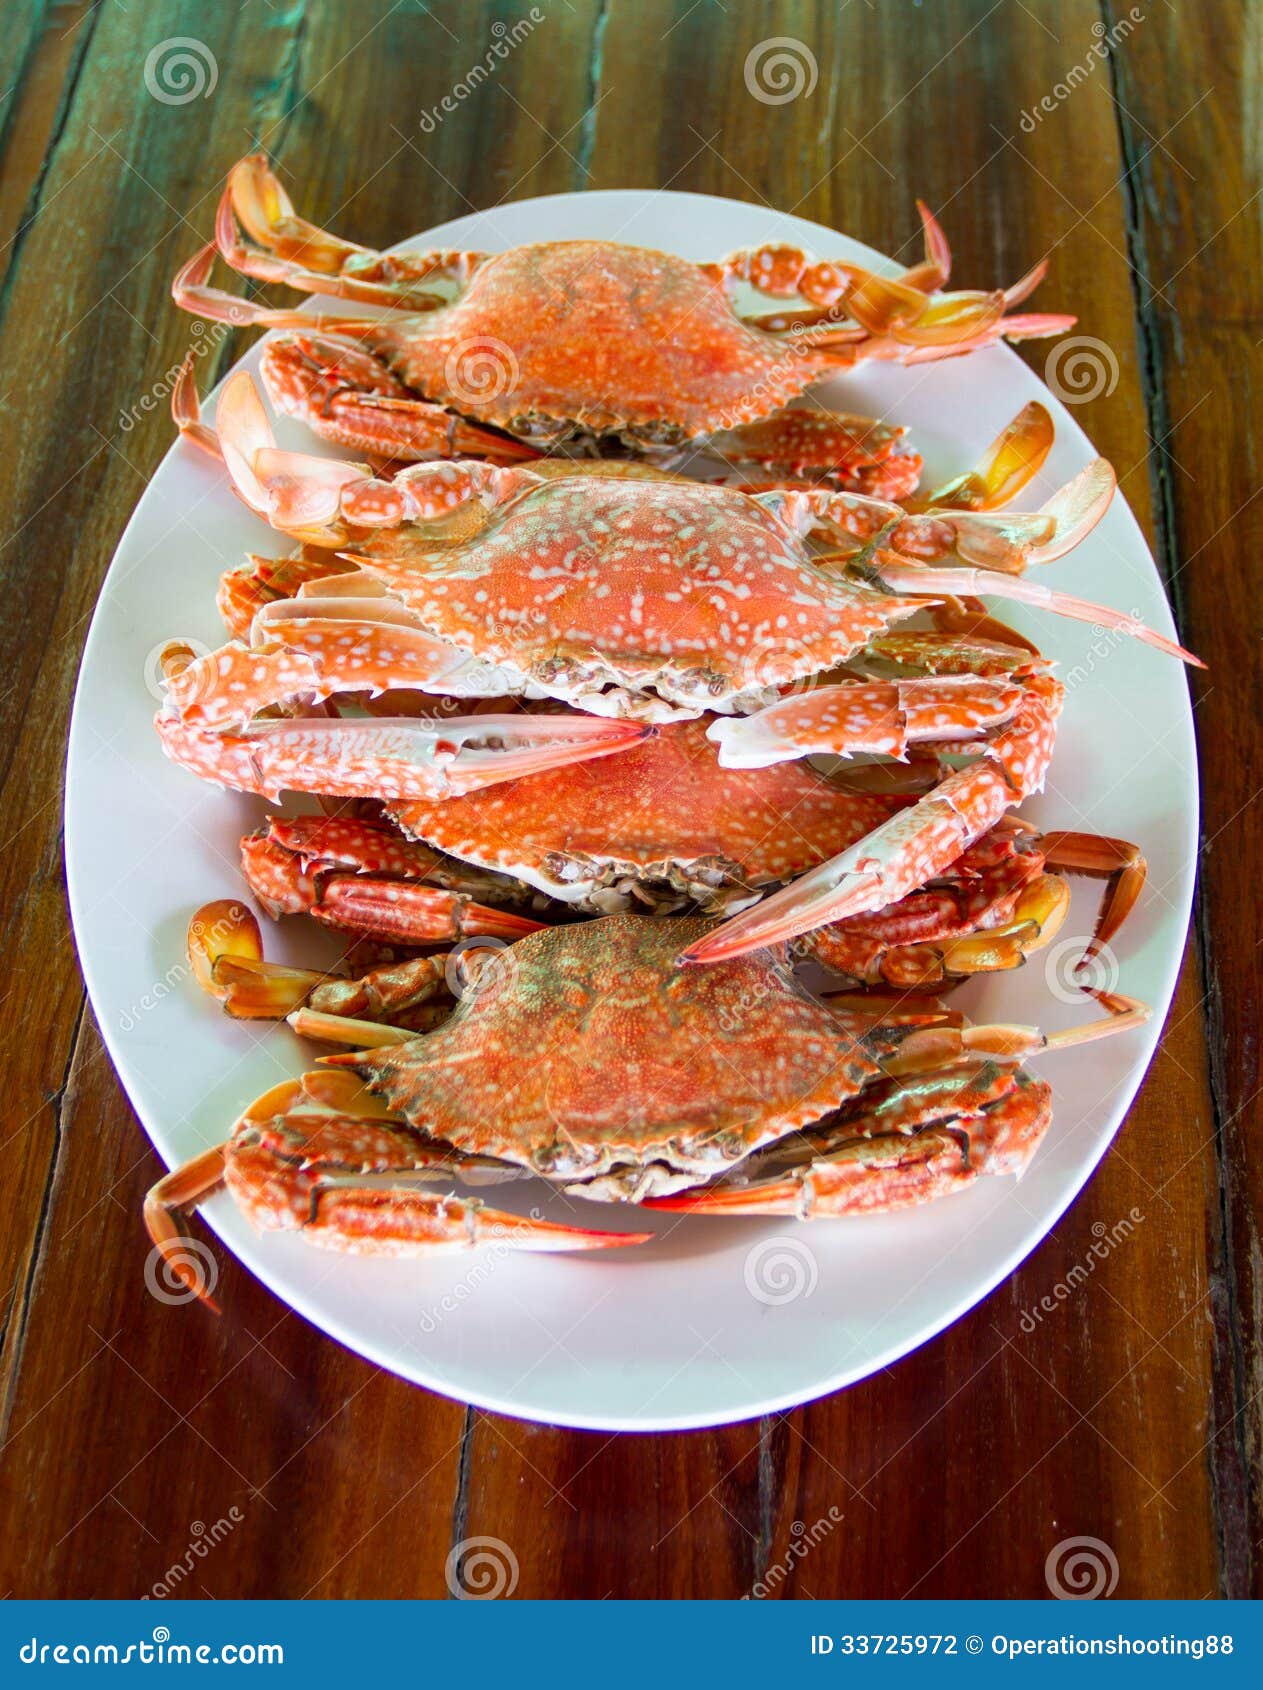 Steamed crab stock photo. Image of fish, lobster, legs - 33725972